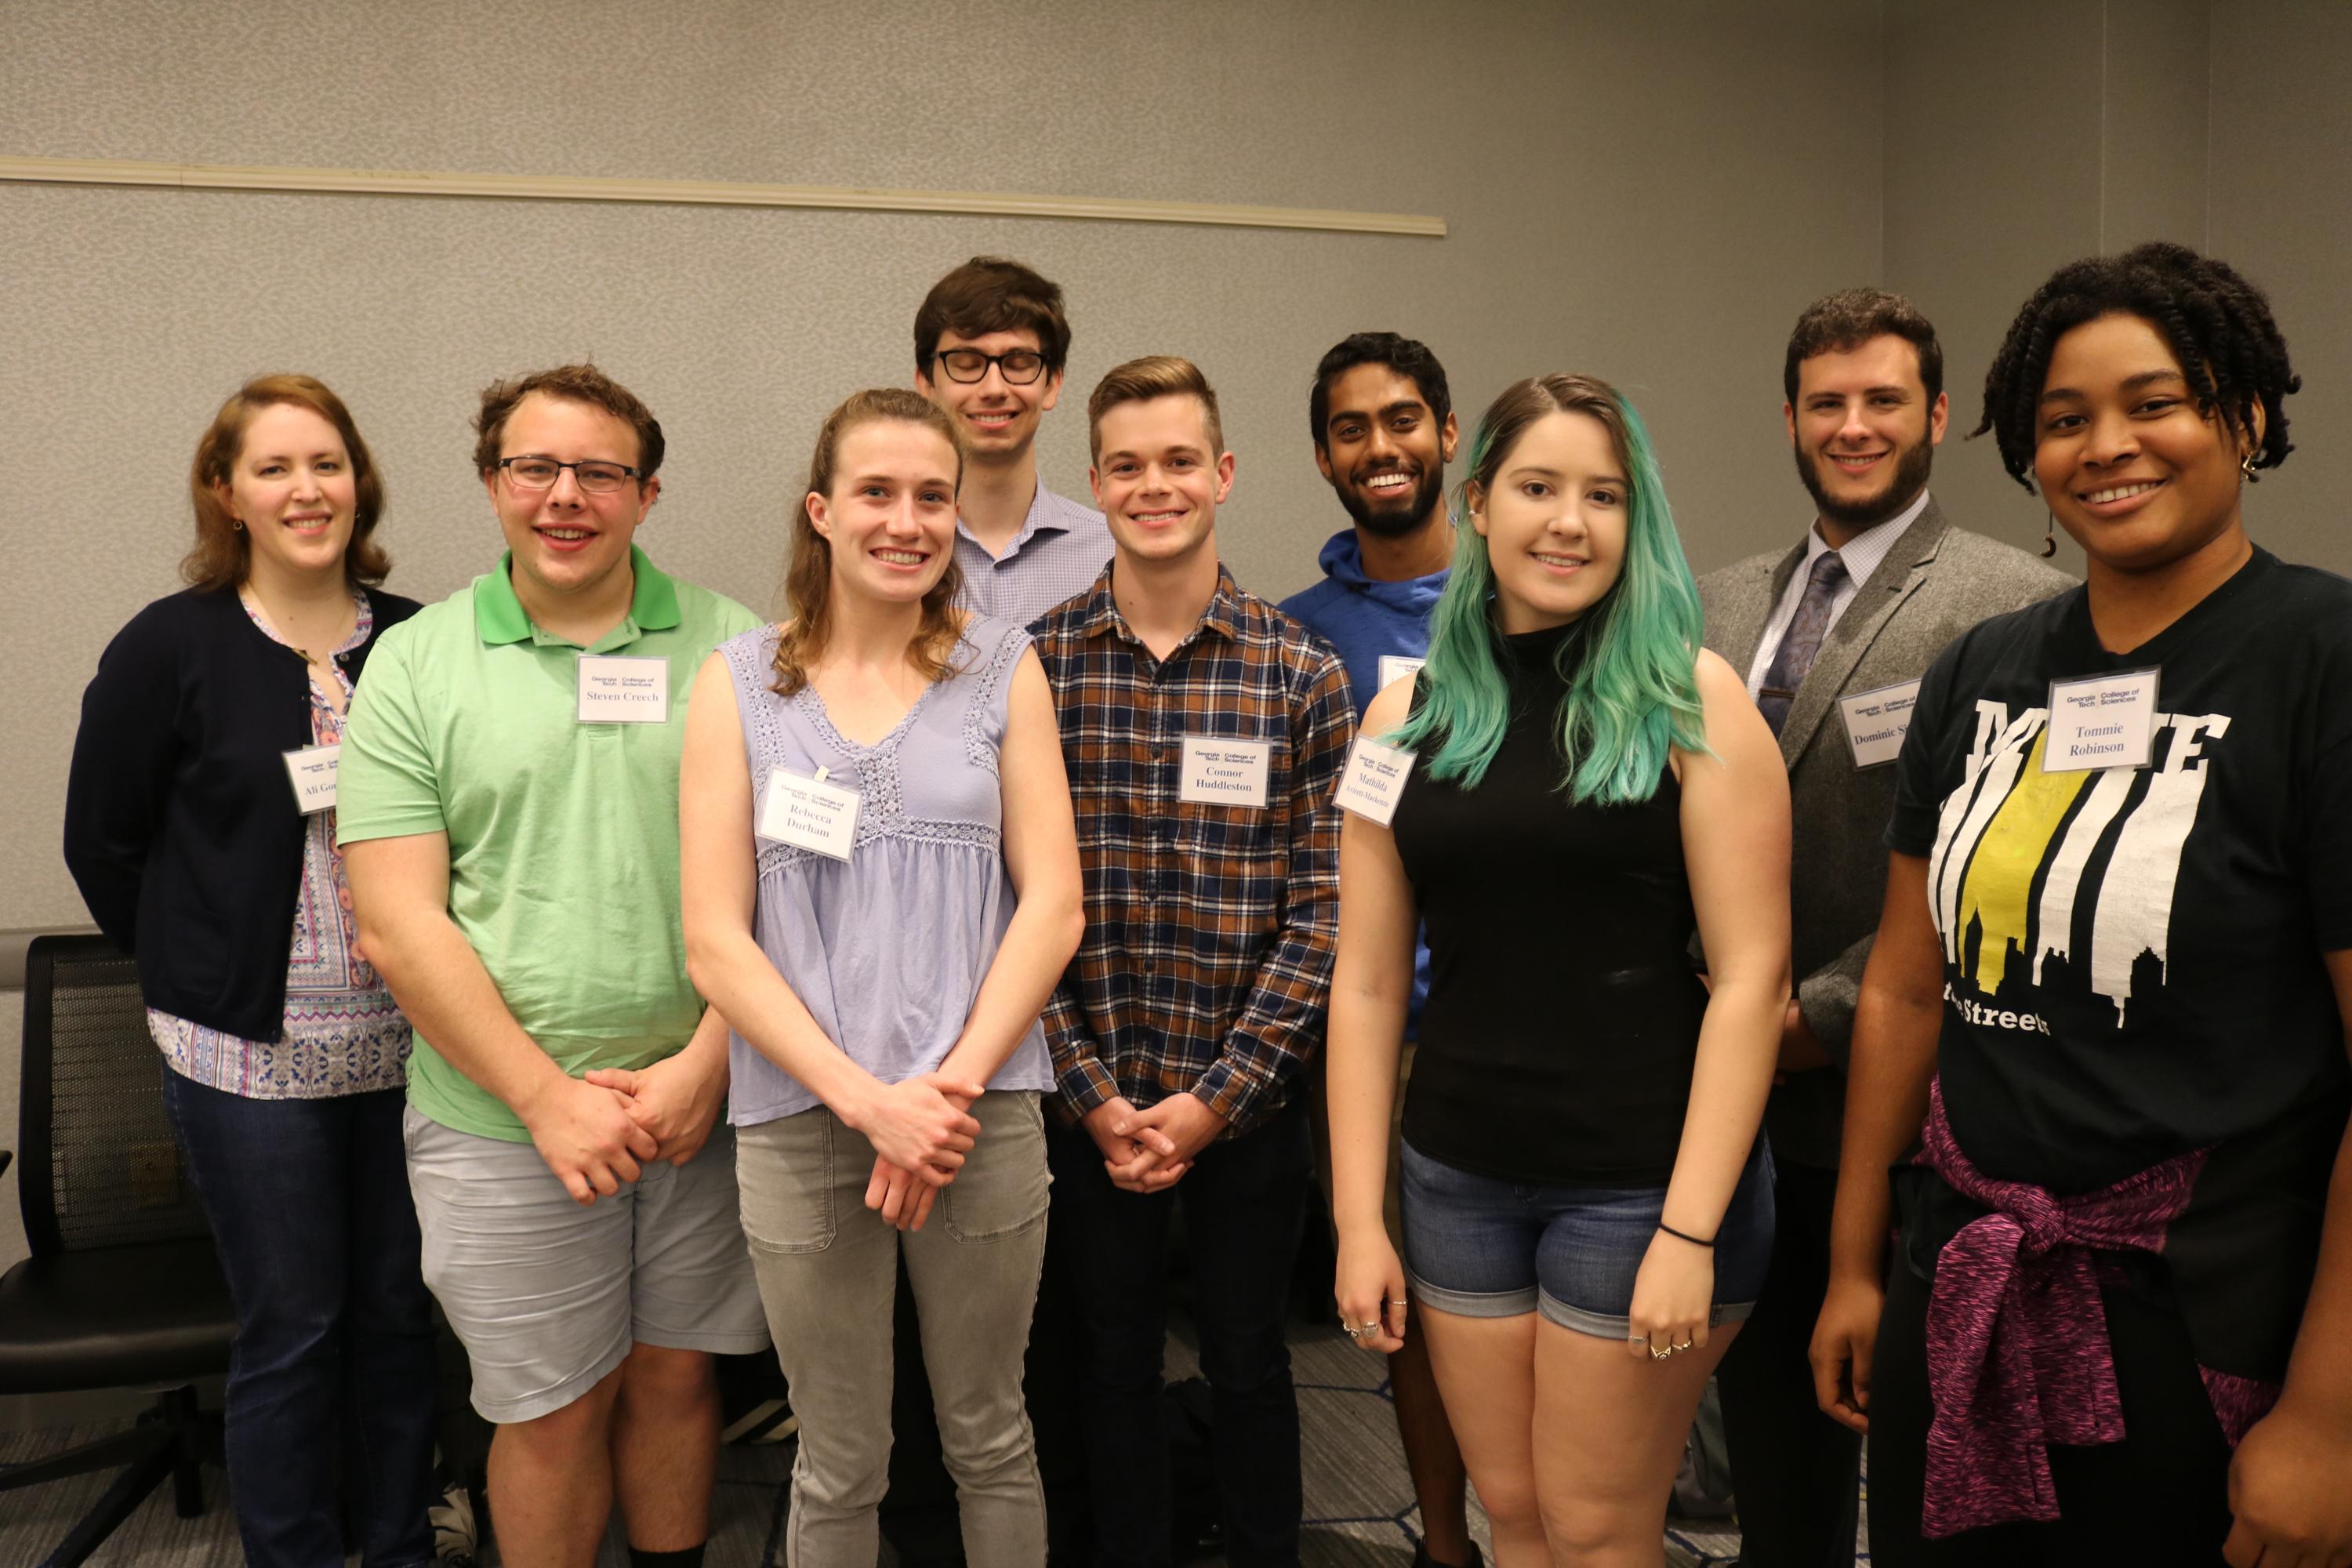 2019 College of Sciences Student Award Winners